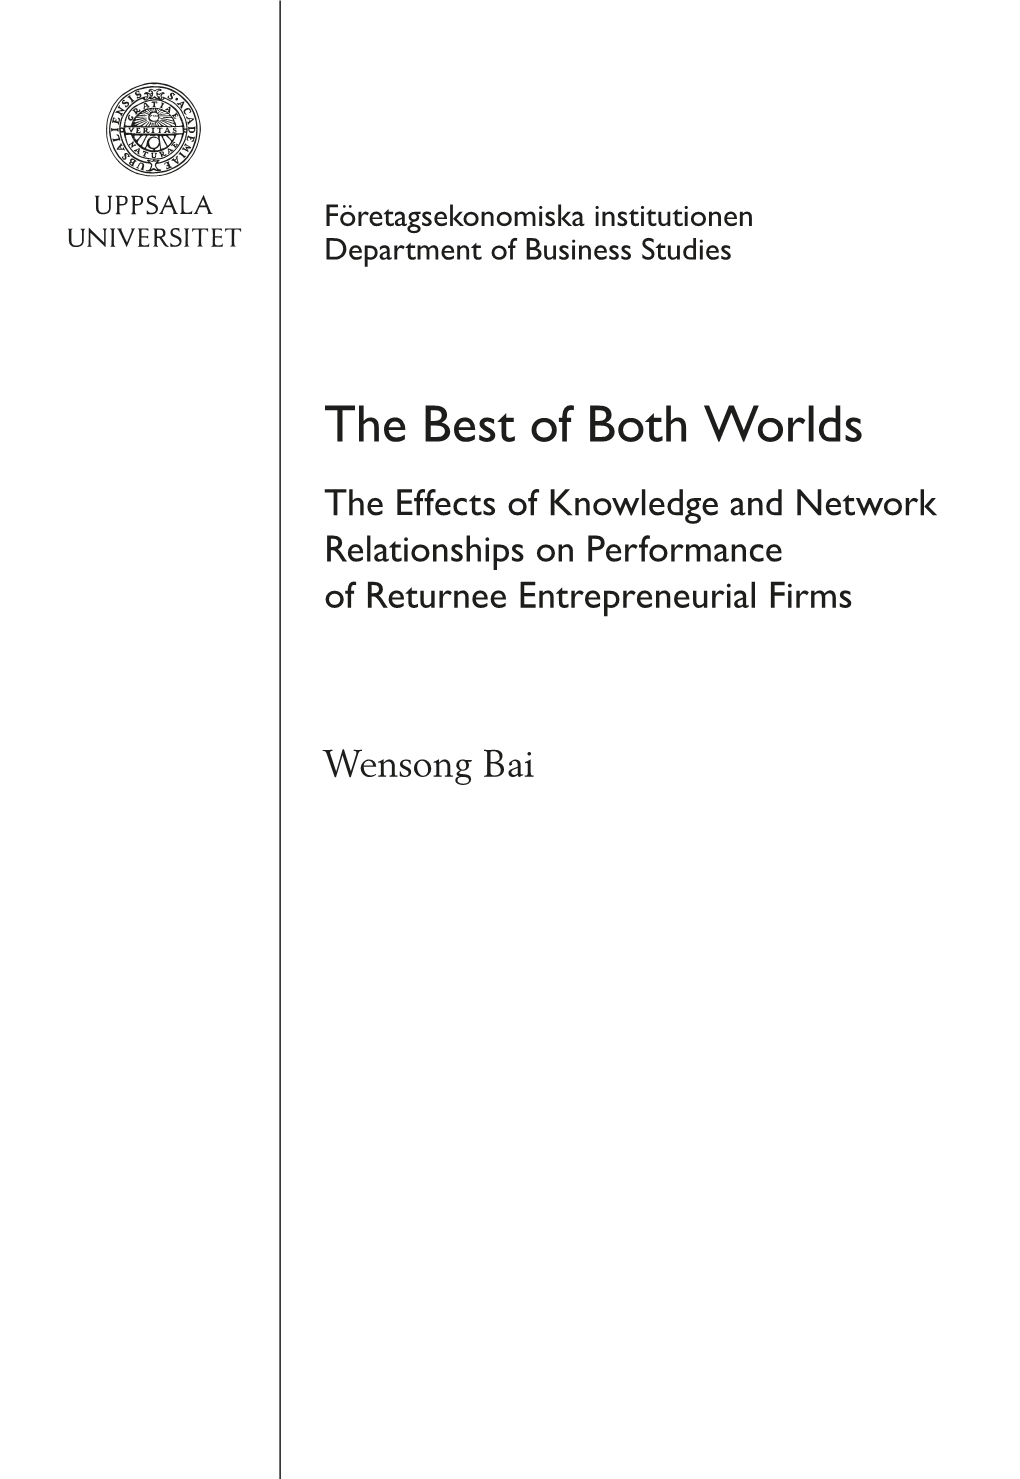 The Best of Both Worlds the Effects of Knowledge and Network Relationships on Performance of Returnee Entrepreneurial Firms